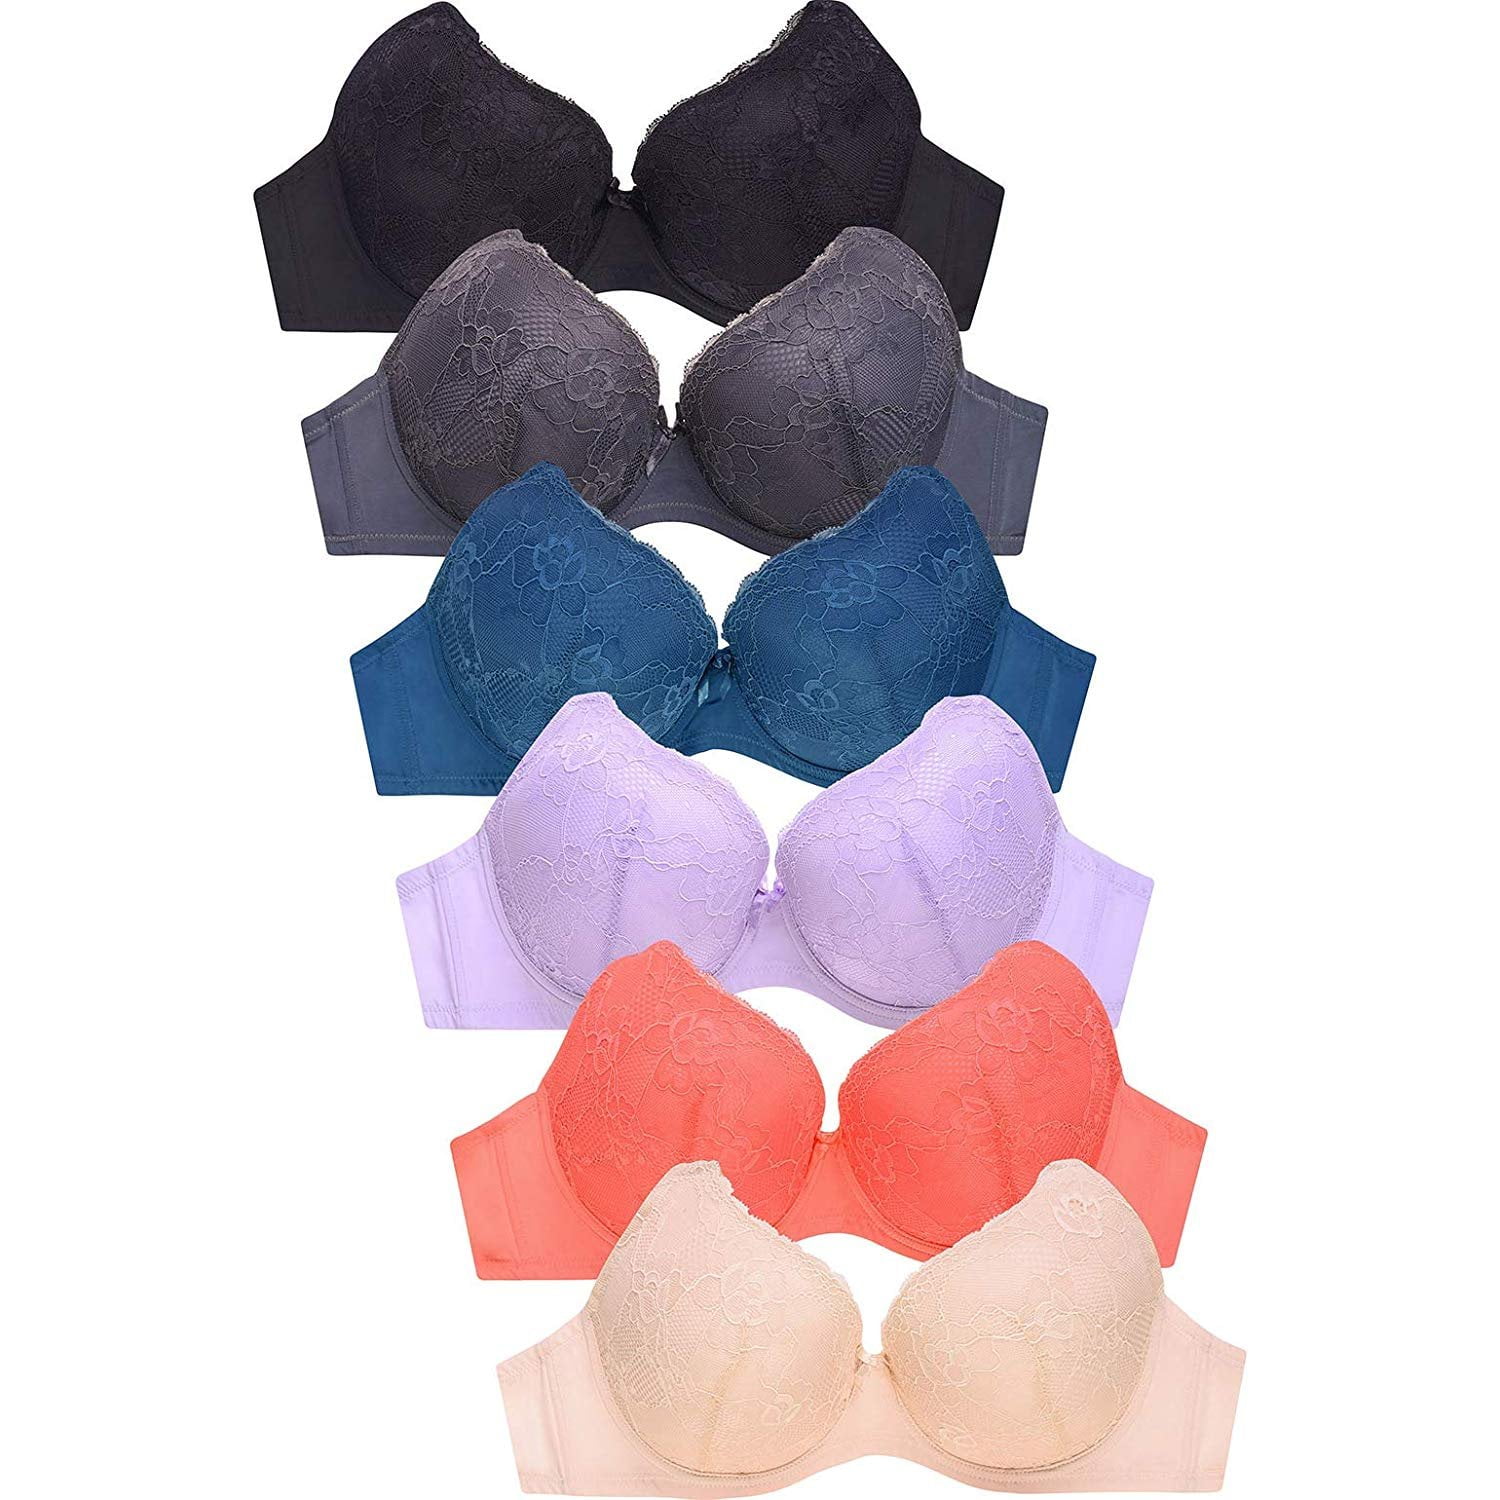 Women's Basic Lace/Plain Lace Bras (Pack of 6)- Various Styles (38B,  BR4235P2)